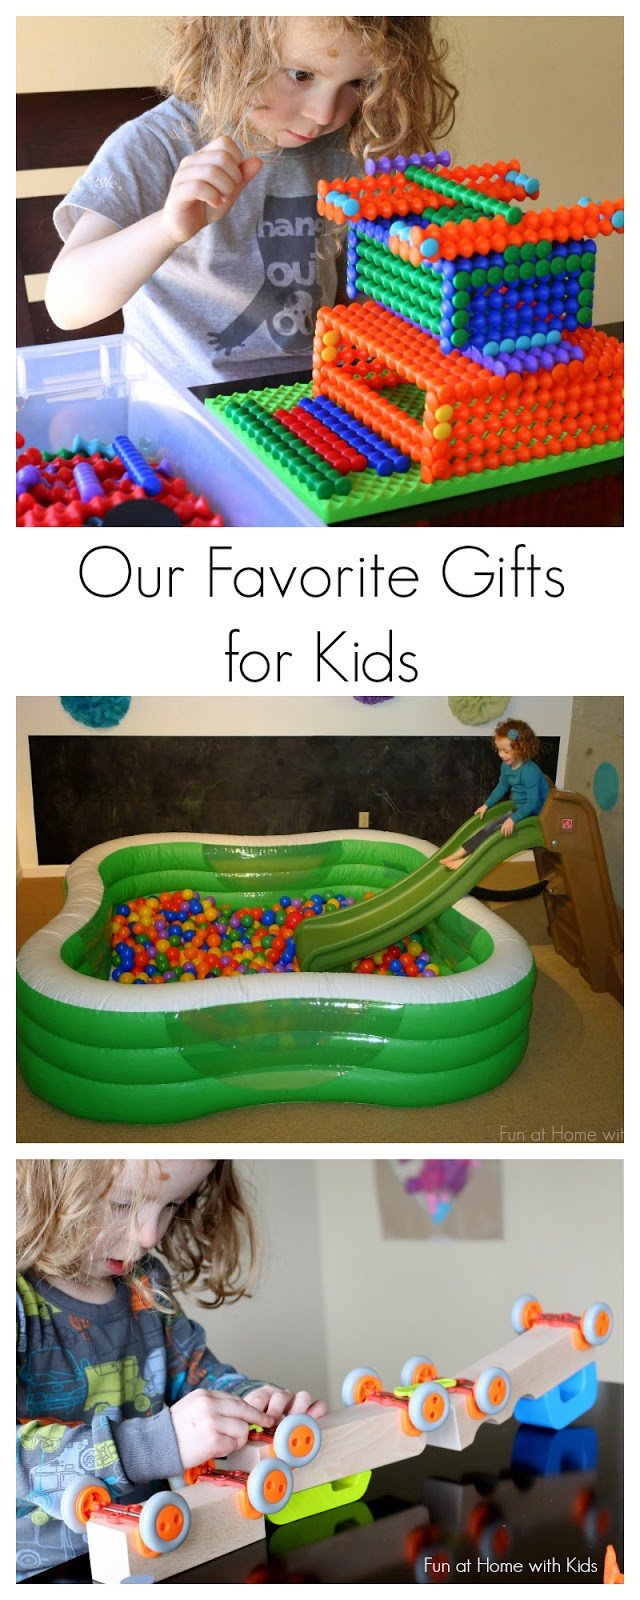 Hottest Gifts For Kids
 Our 10 Best and Favorite Gift Ideas for Kids